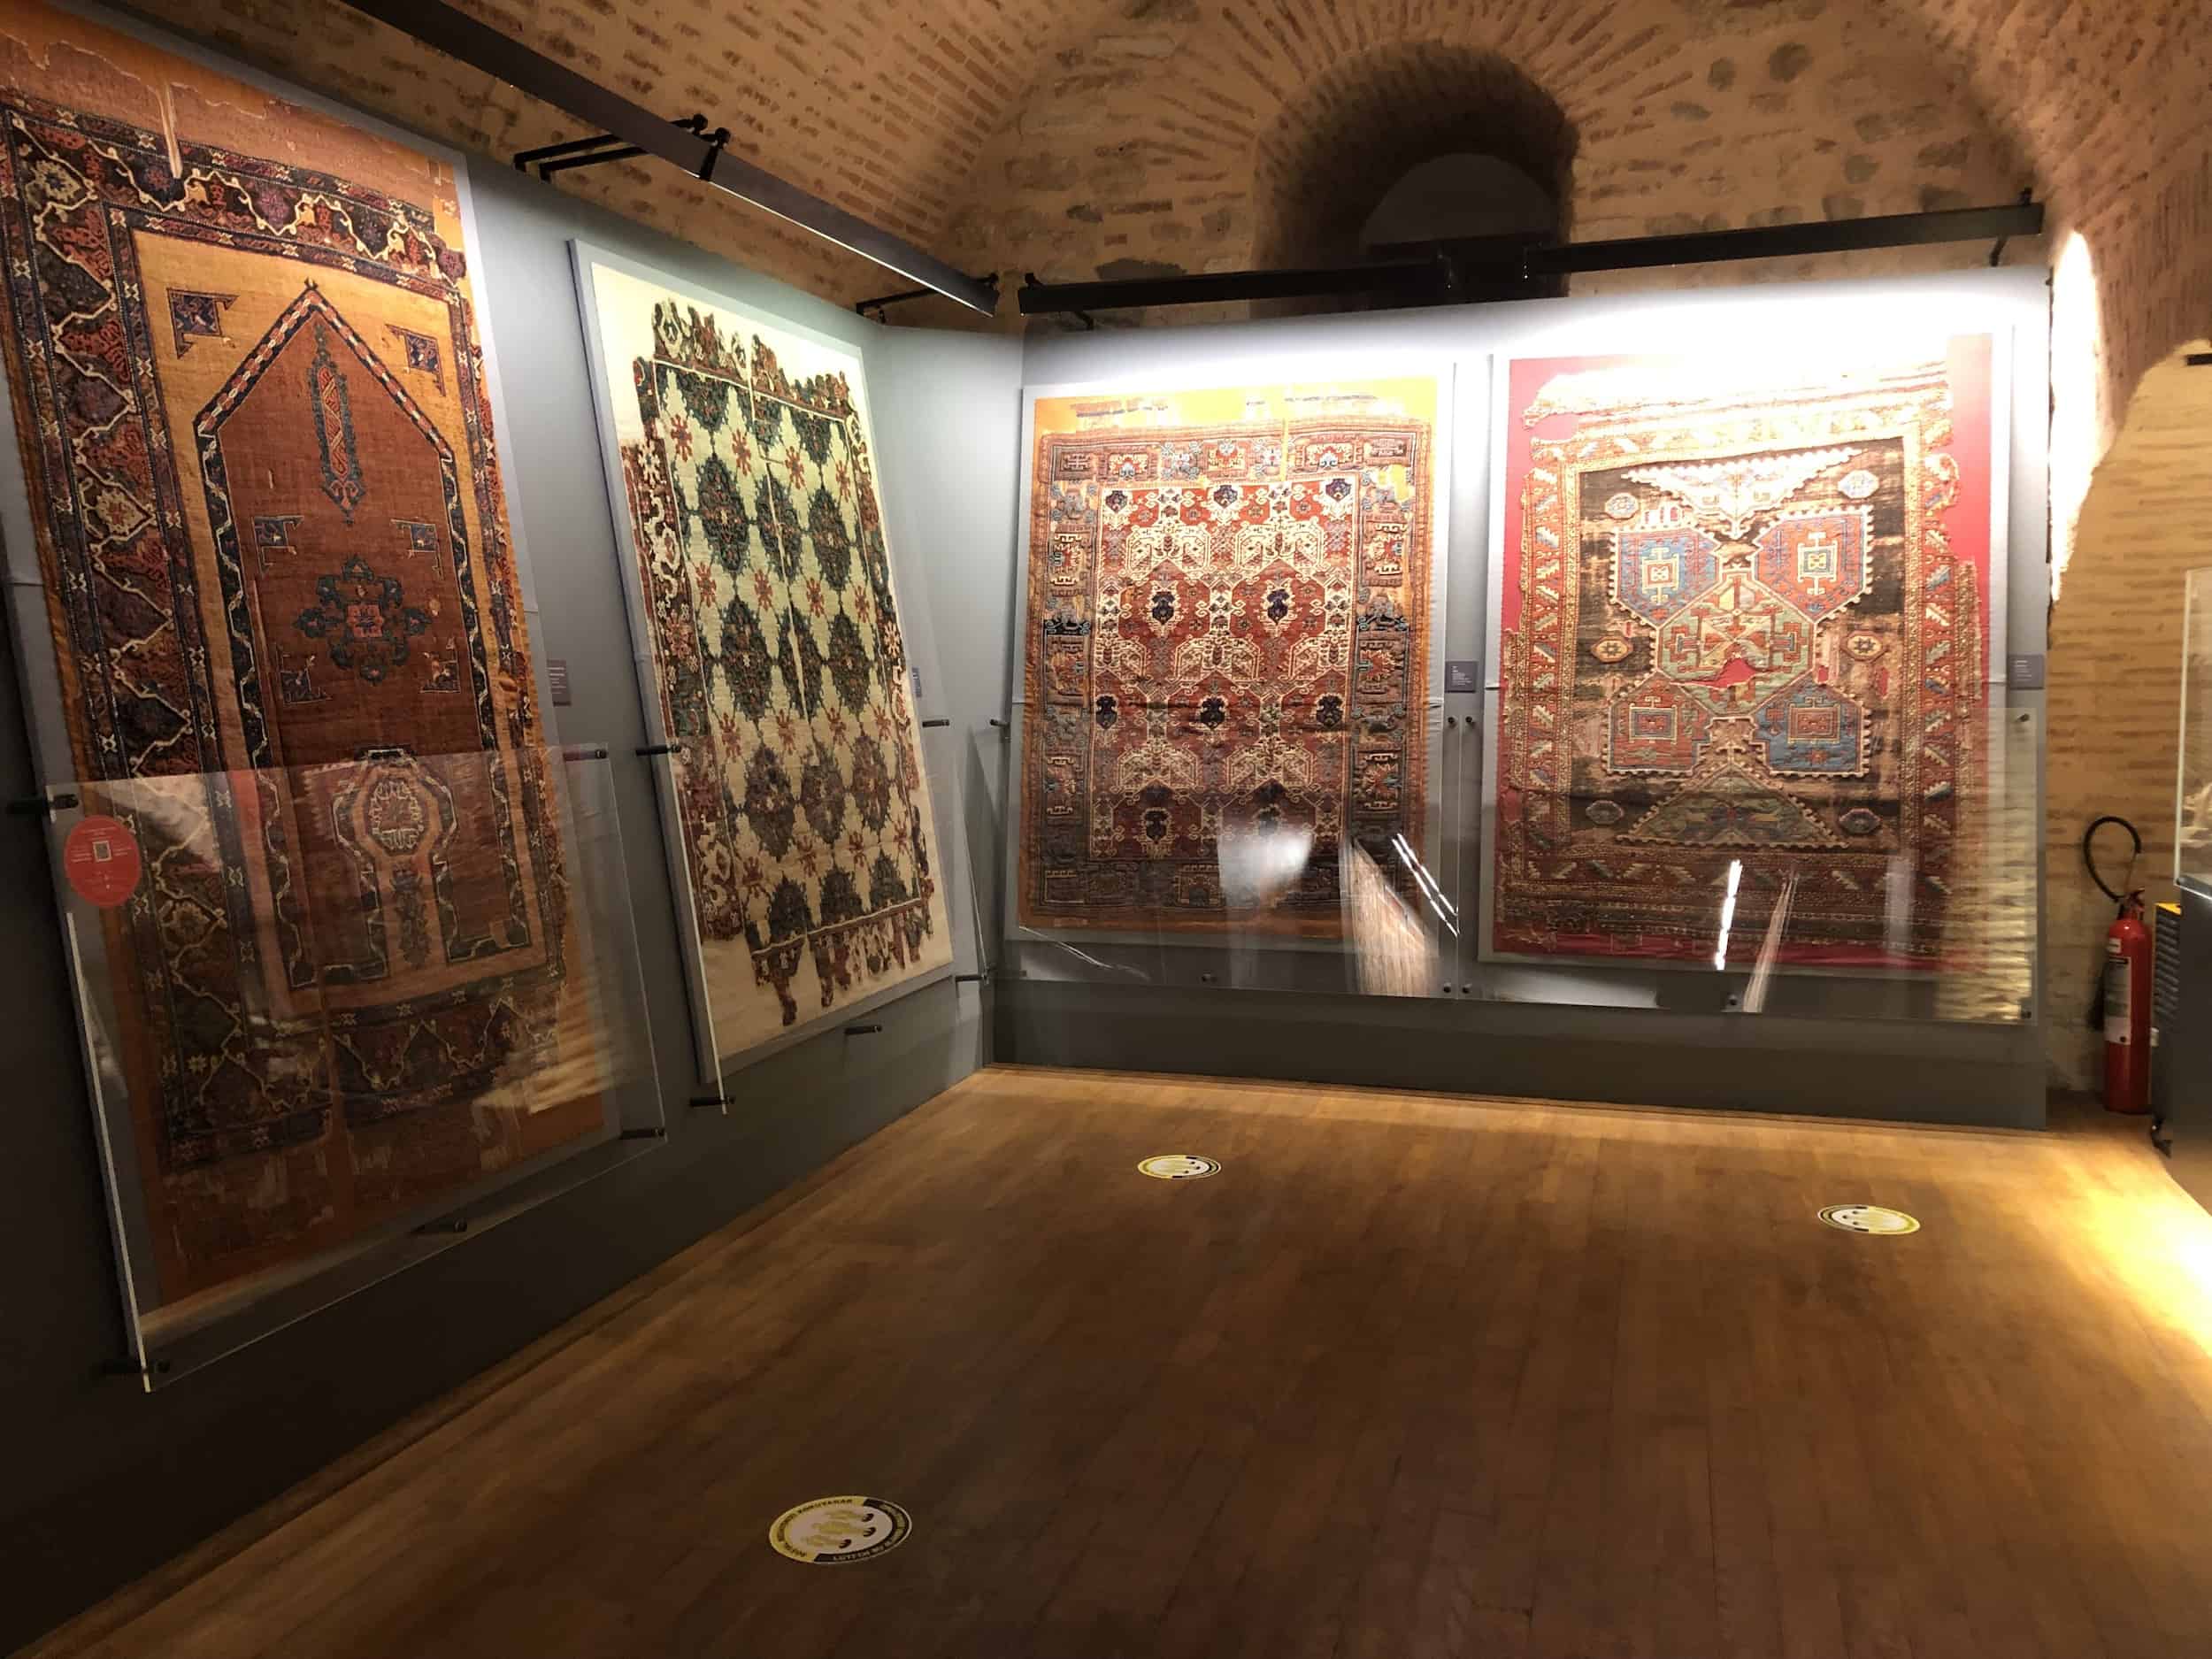 Carpets in the ethnographic collection at the Museum of Turkish and Islamic Arts in Istanbul, Turkey